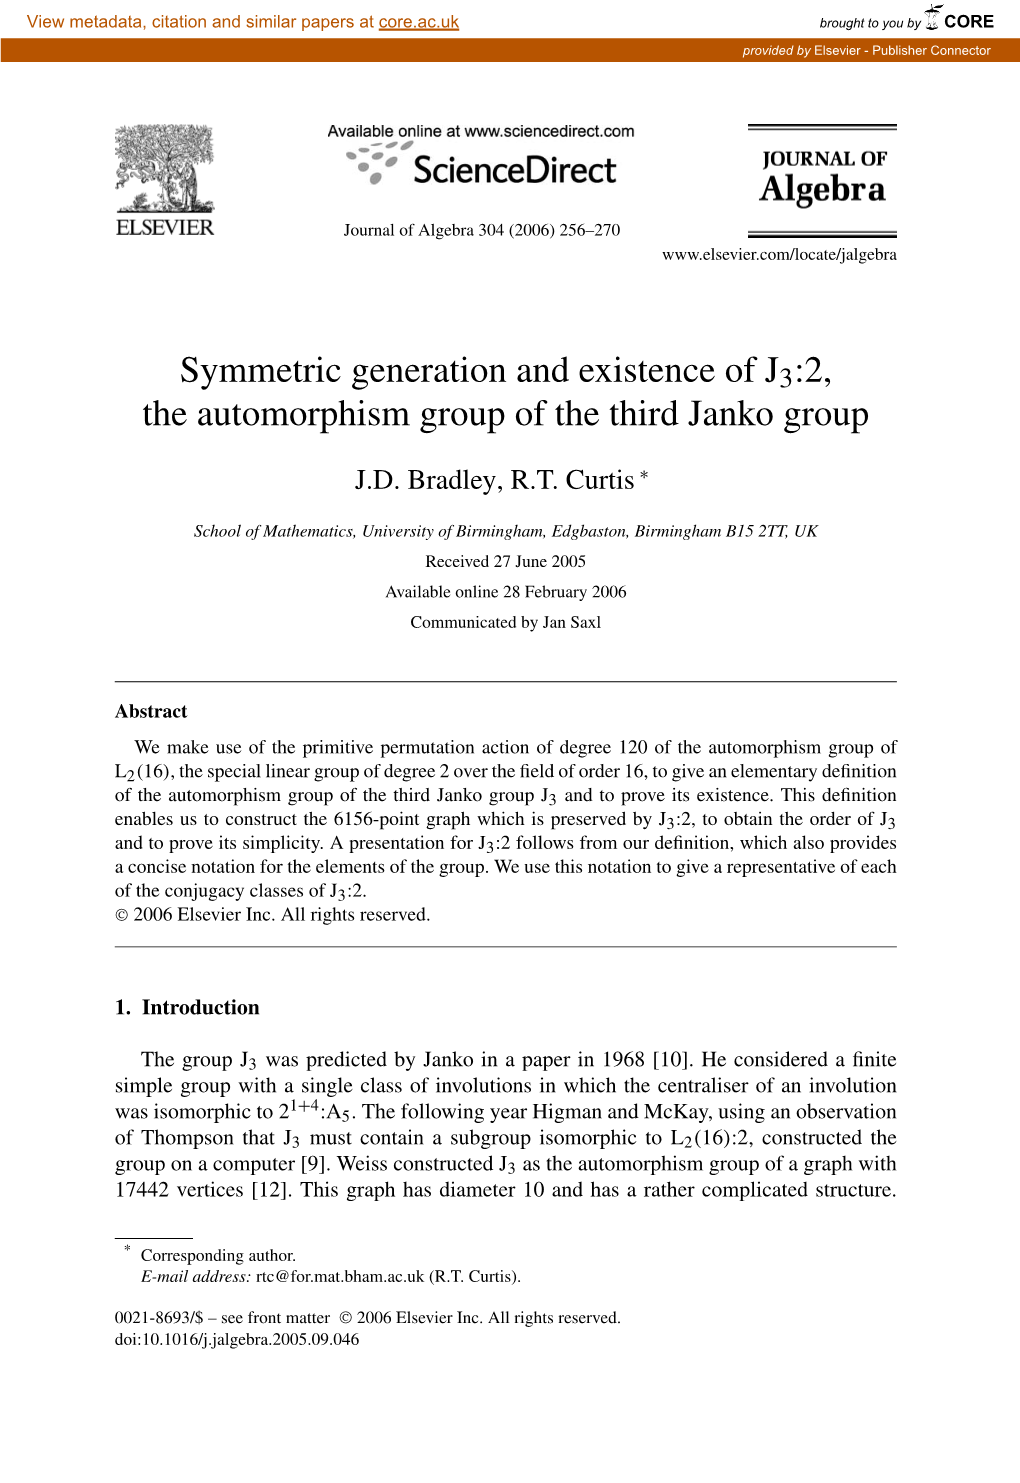 Symmetric Generation and Existence of J3:2, the Automorphism Group of the Third Janko Group